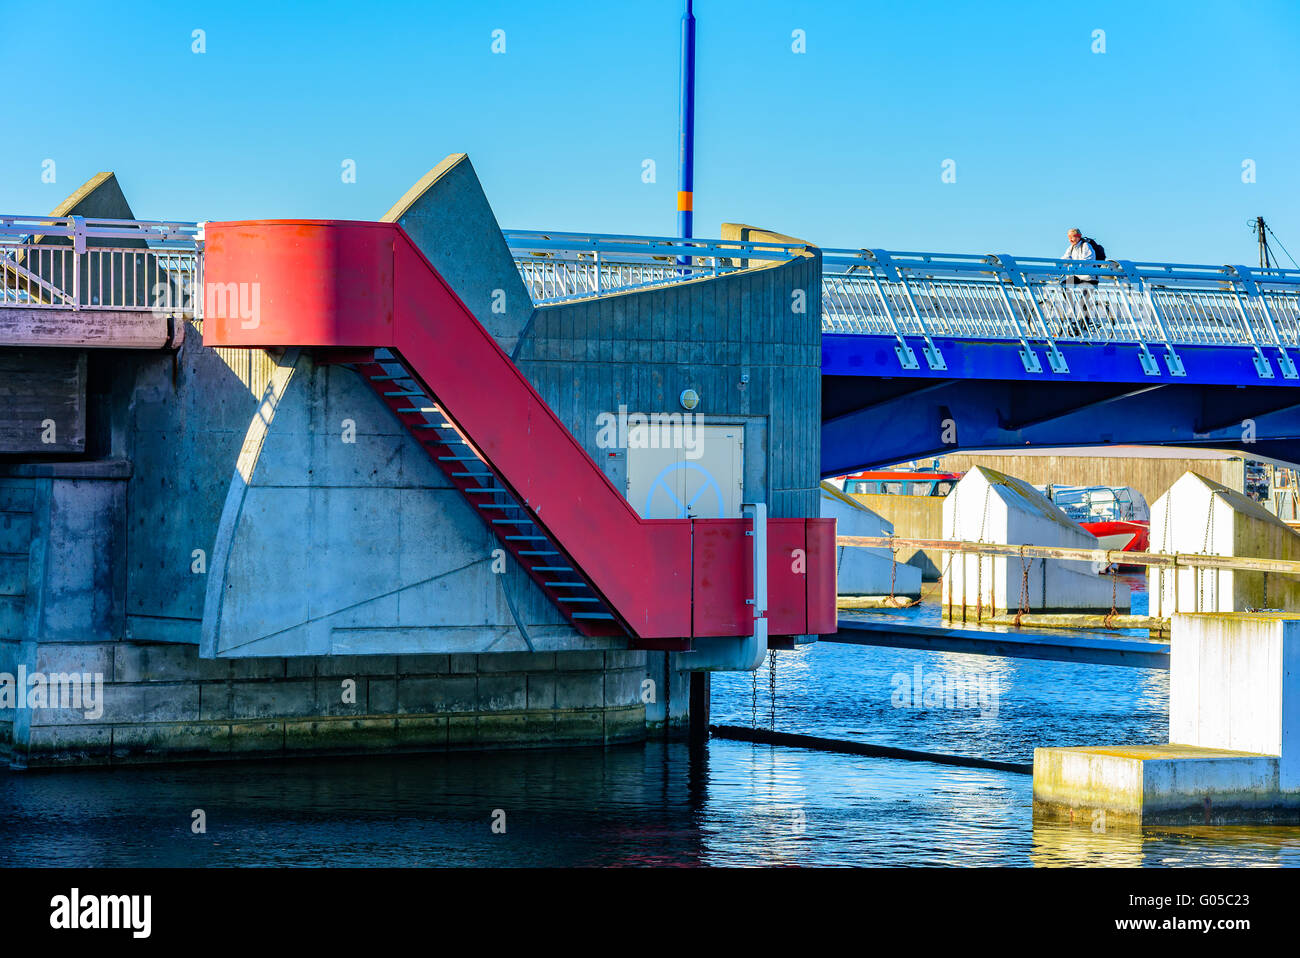 Falsterbo, Sweden - April 11, 2016: The outside of the concrete engine room controlling the opening of the bridge over Falsterbo Stock Photo